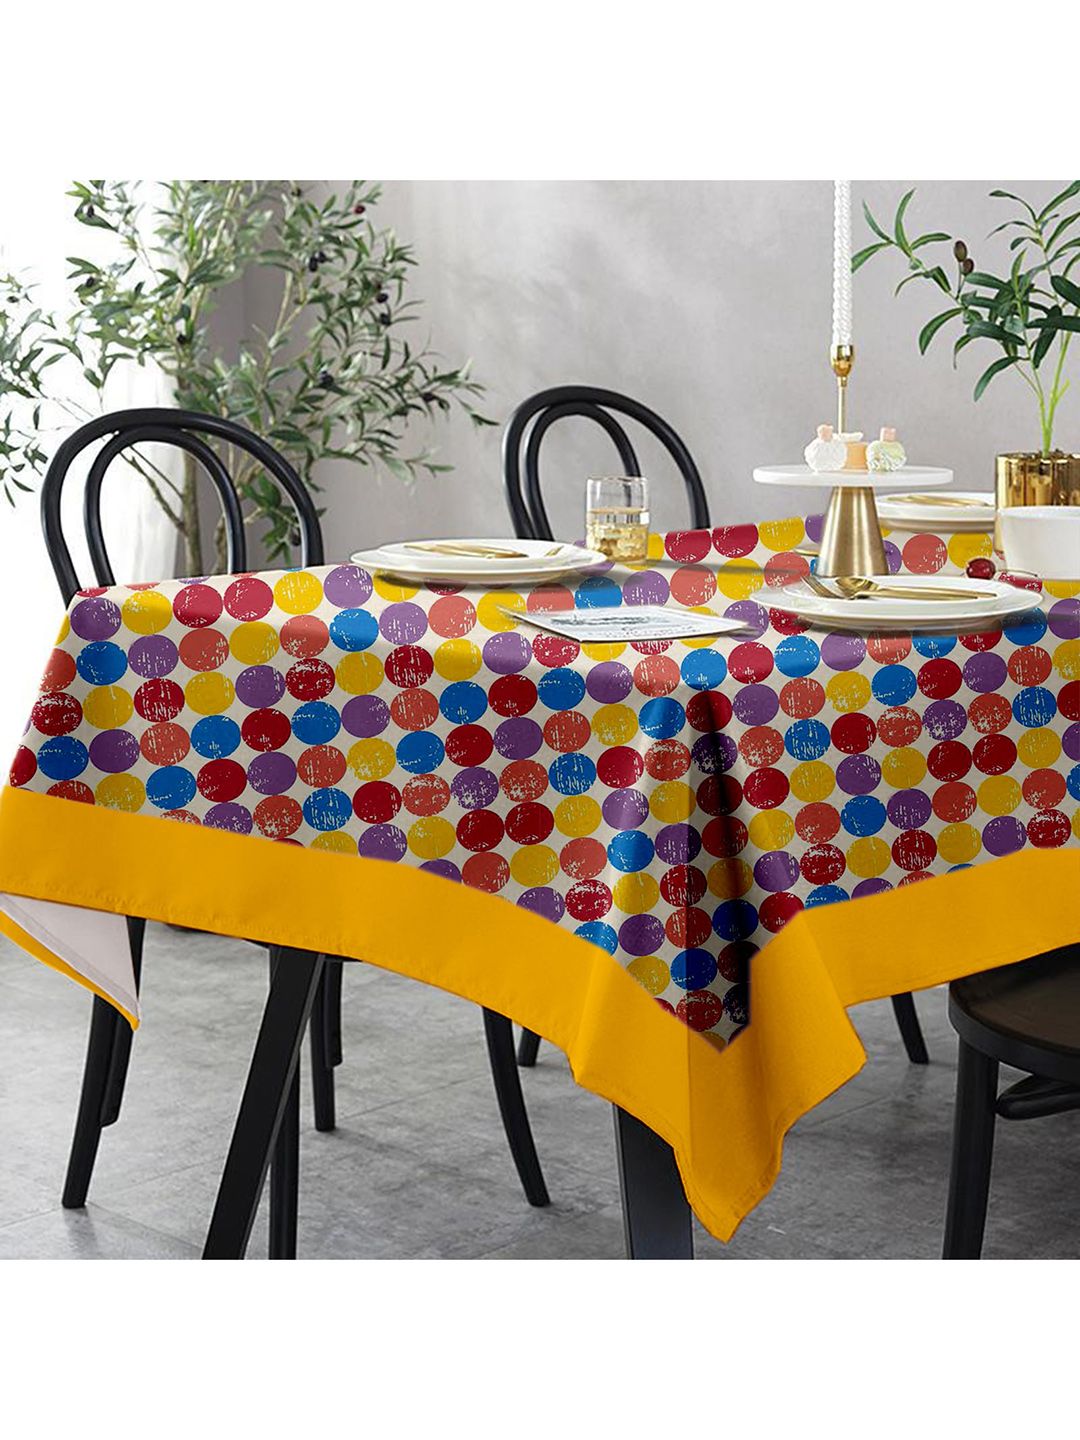 Lushomes 4 Seater Titac Printed Table Cloth Price in India